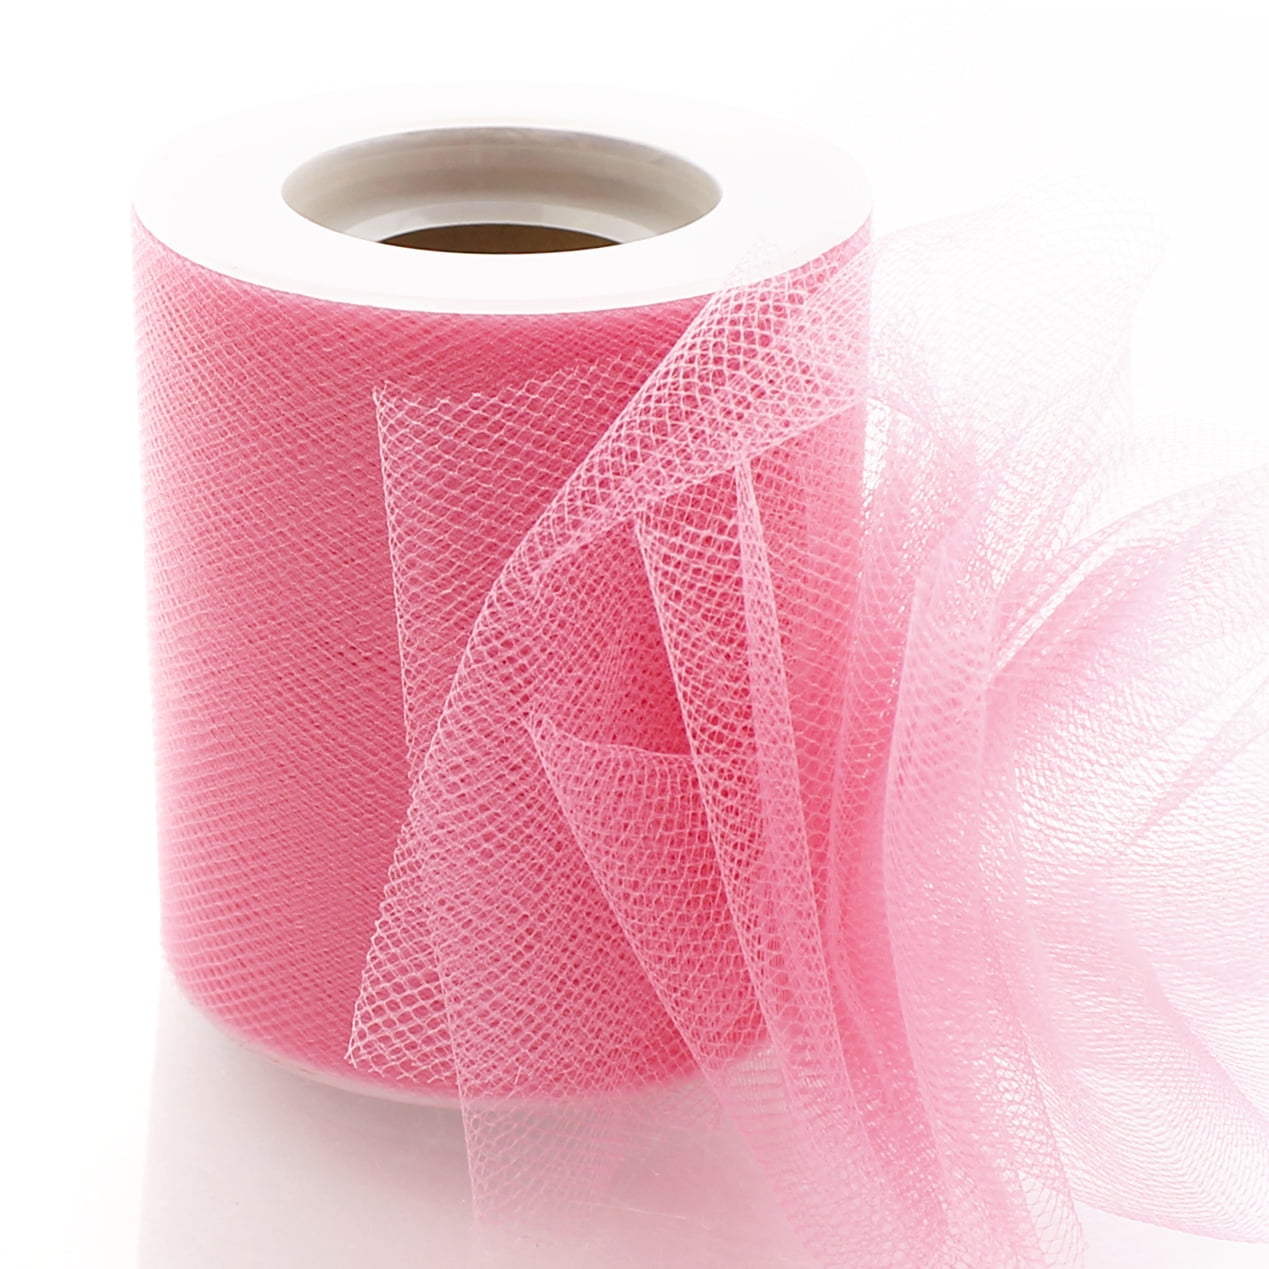 Hairbow Center 3 inch Premium Tulle Fabric Roll for Crafts, Wedding, Party Decorations, Gifts - Hot Pink 25 Yard Spool, Size: 25yds